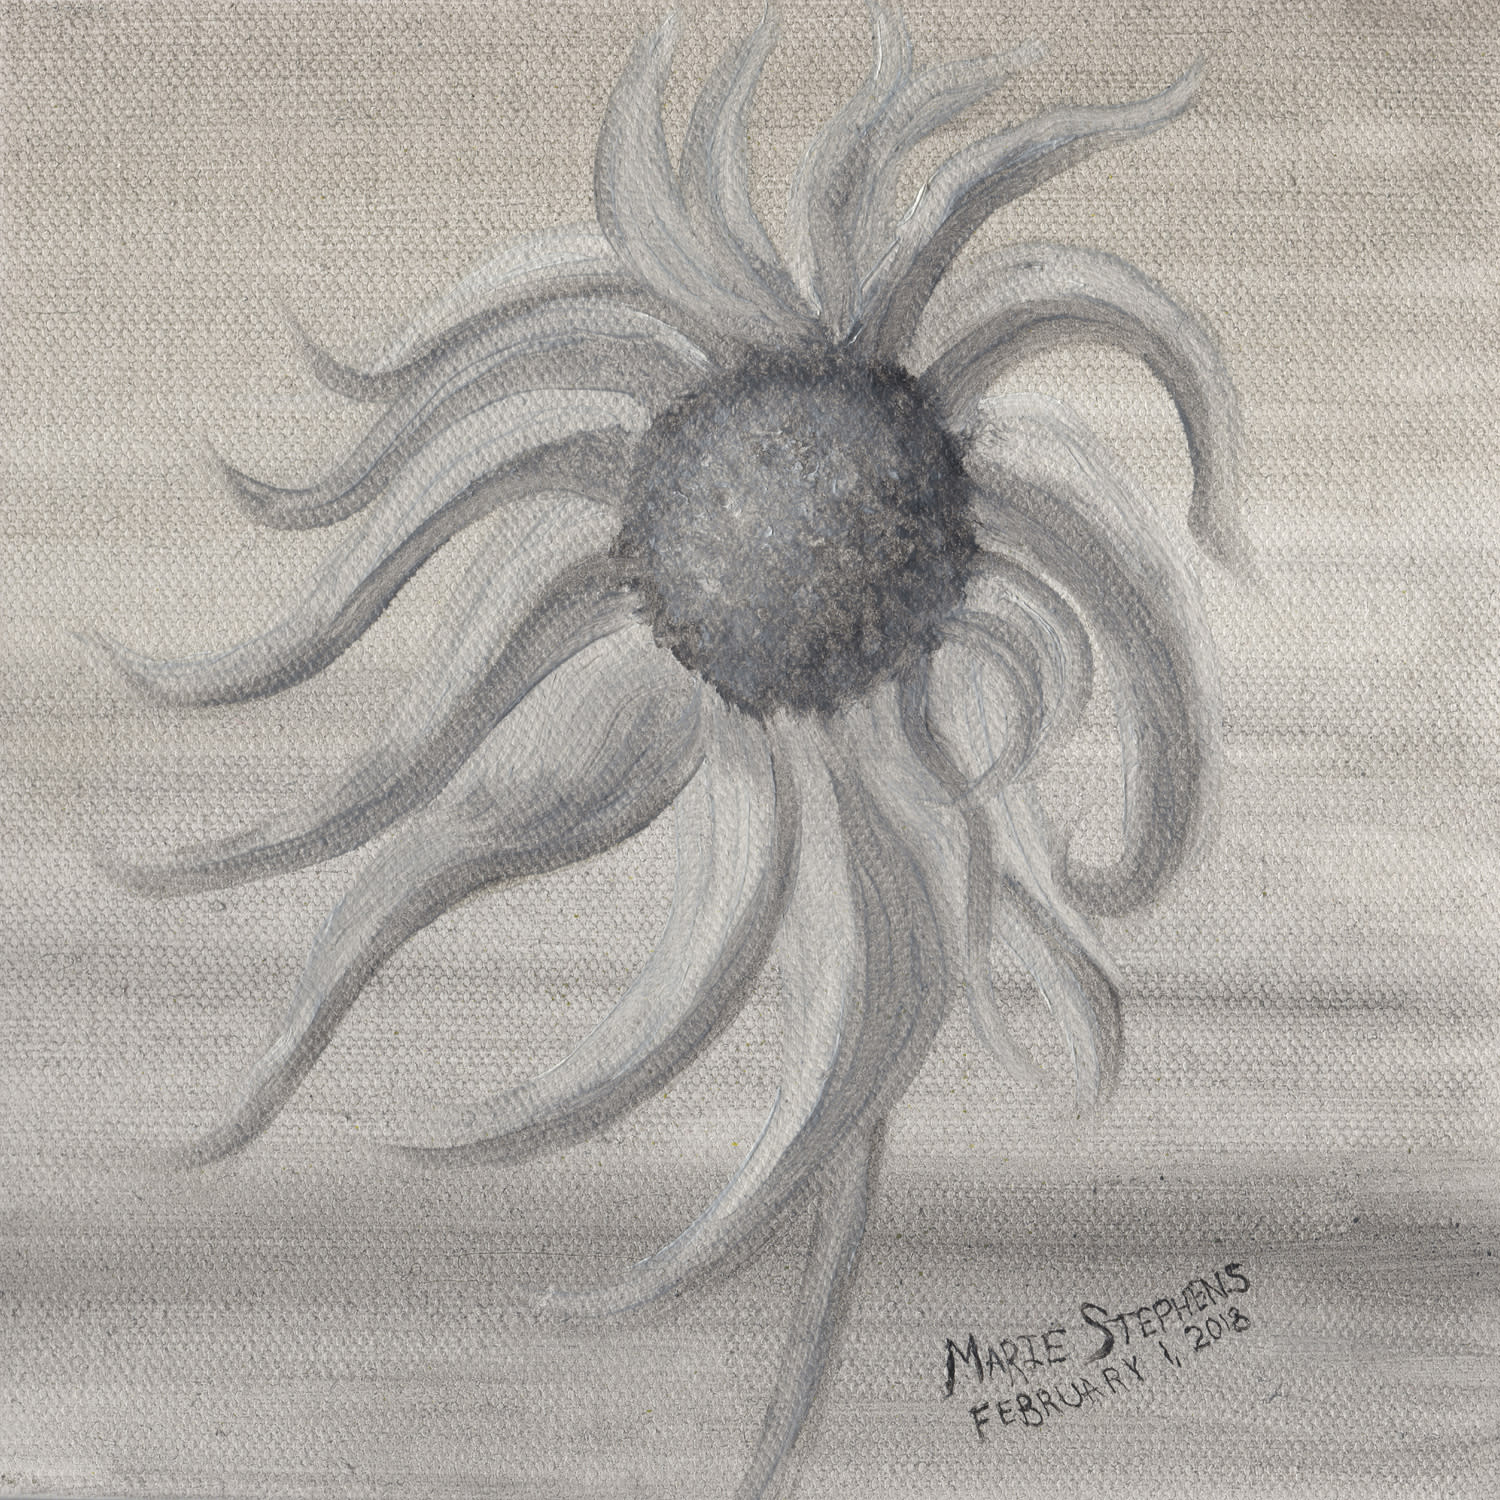 Jury submission purple coneflower oil sepia 3000x3000pixels ohowmd